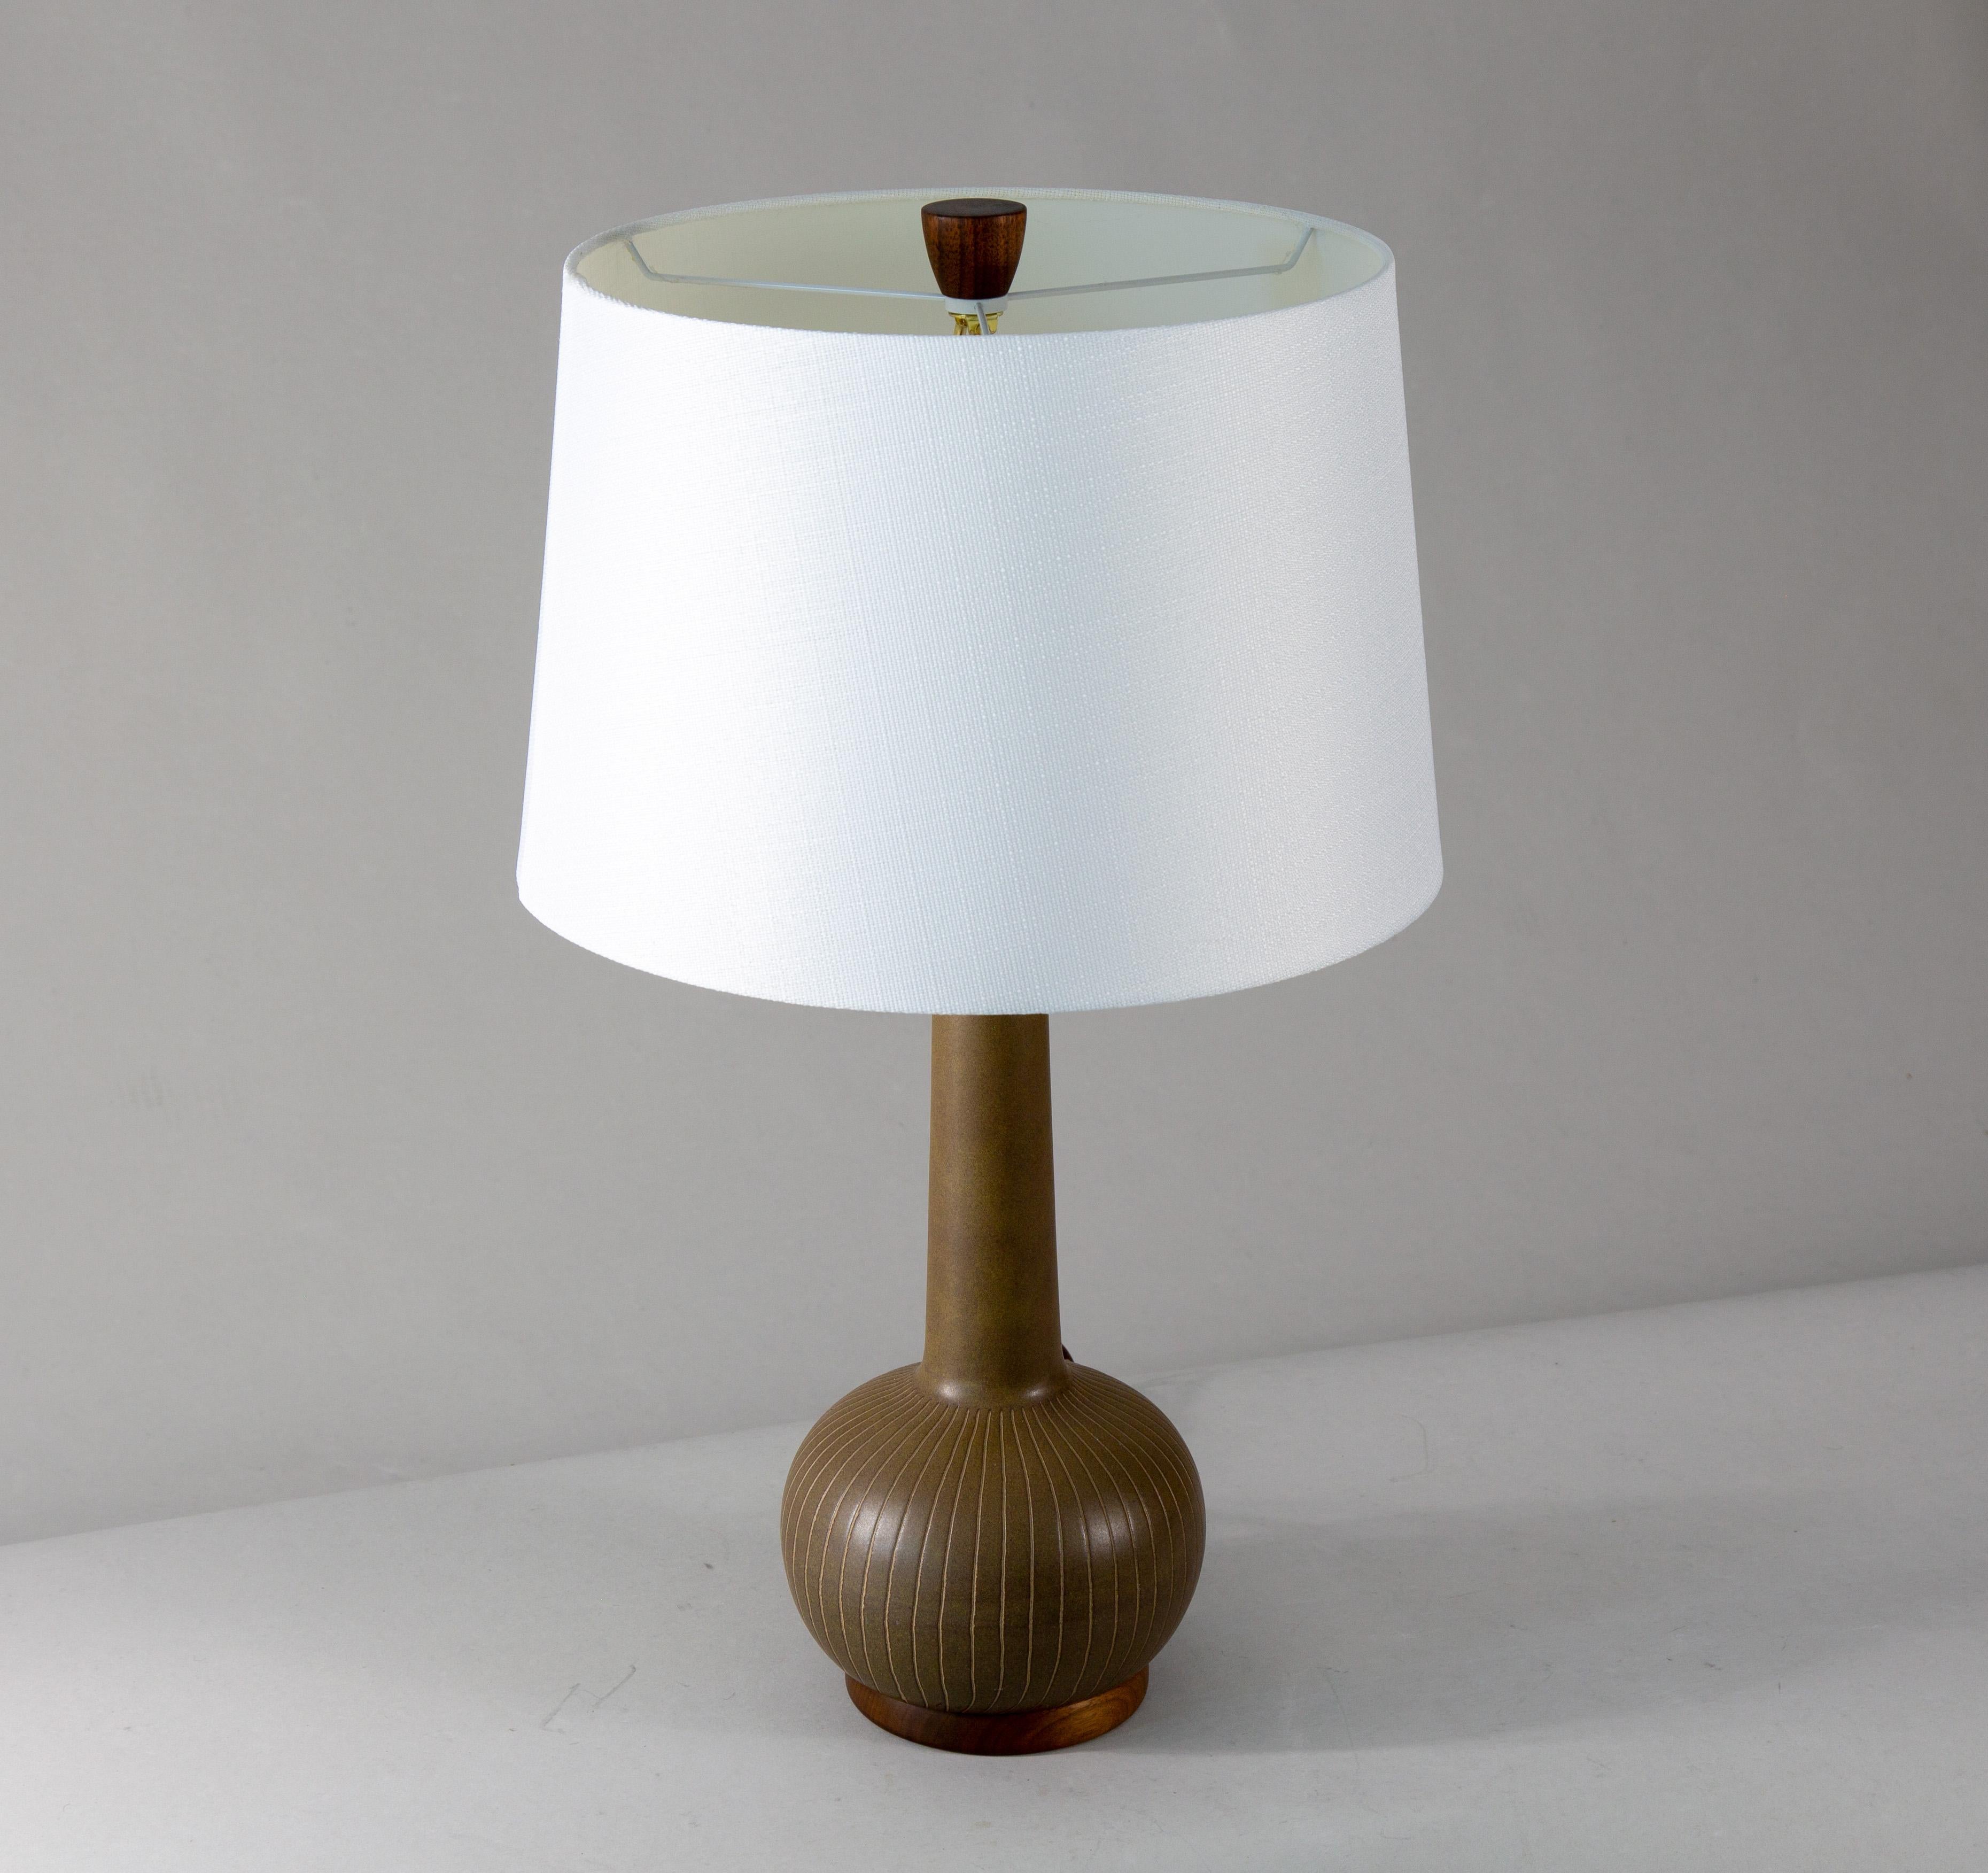 A highly collectable 1960s table lamp designed by Jane and Gordon Martz of Marshall Studios in Veedersburg Indiana. These lamps are highly sought after and are showing up in designs all over the world. Blending sophistication and modern, these lamps